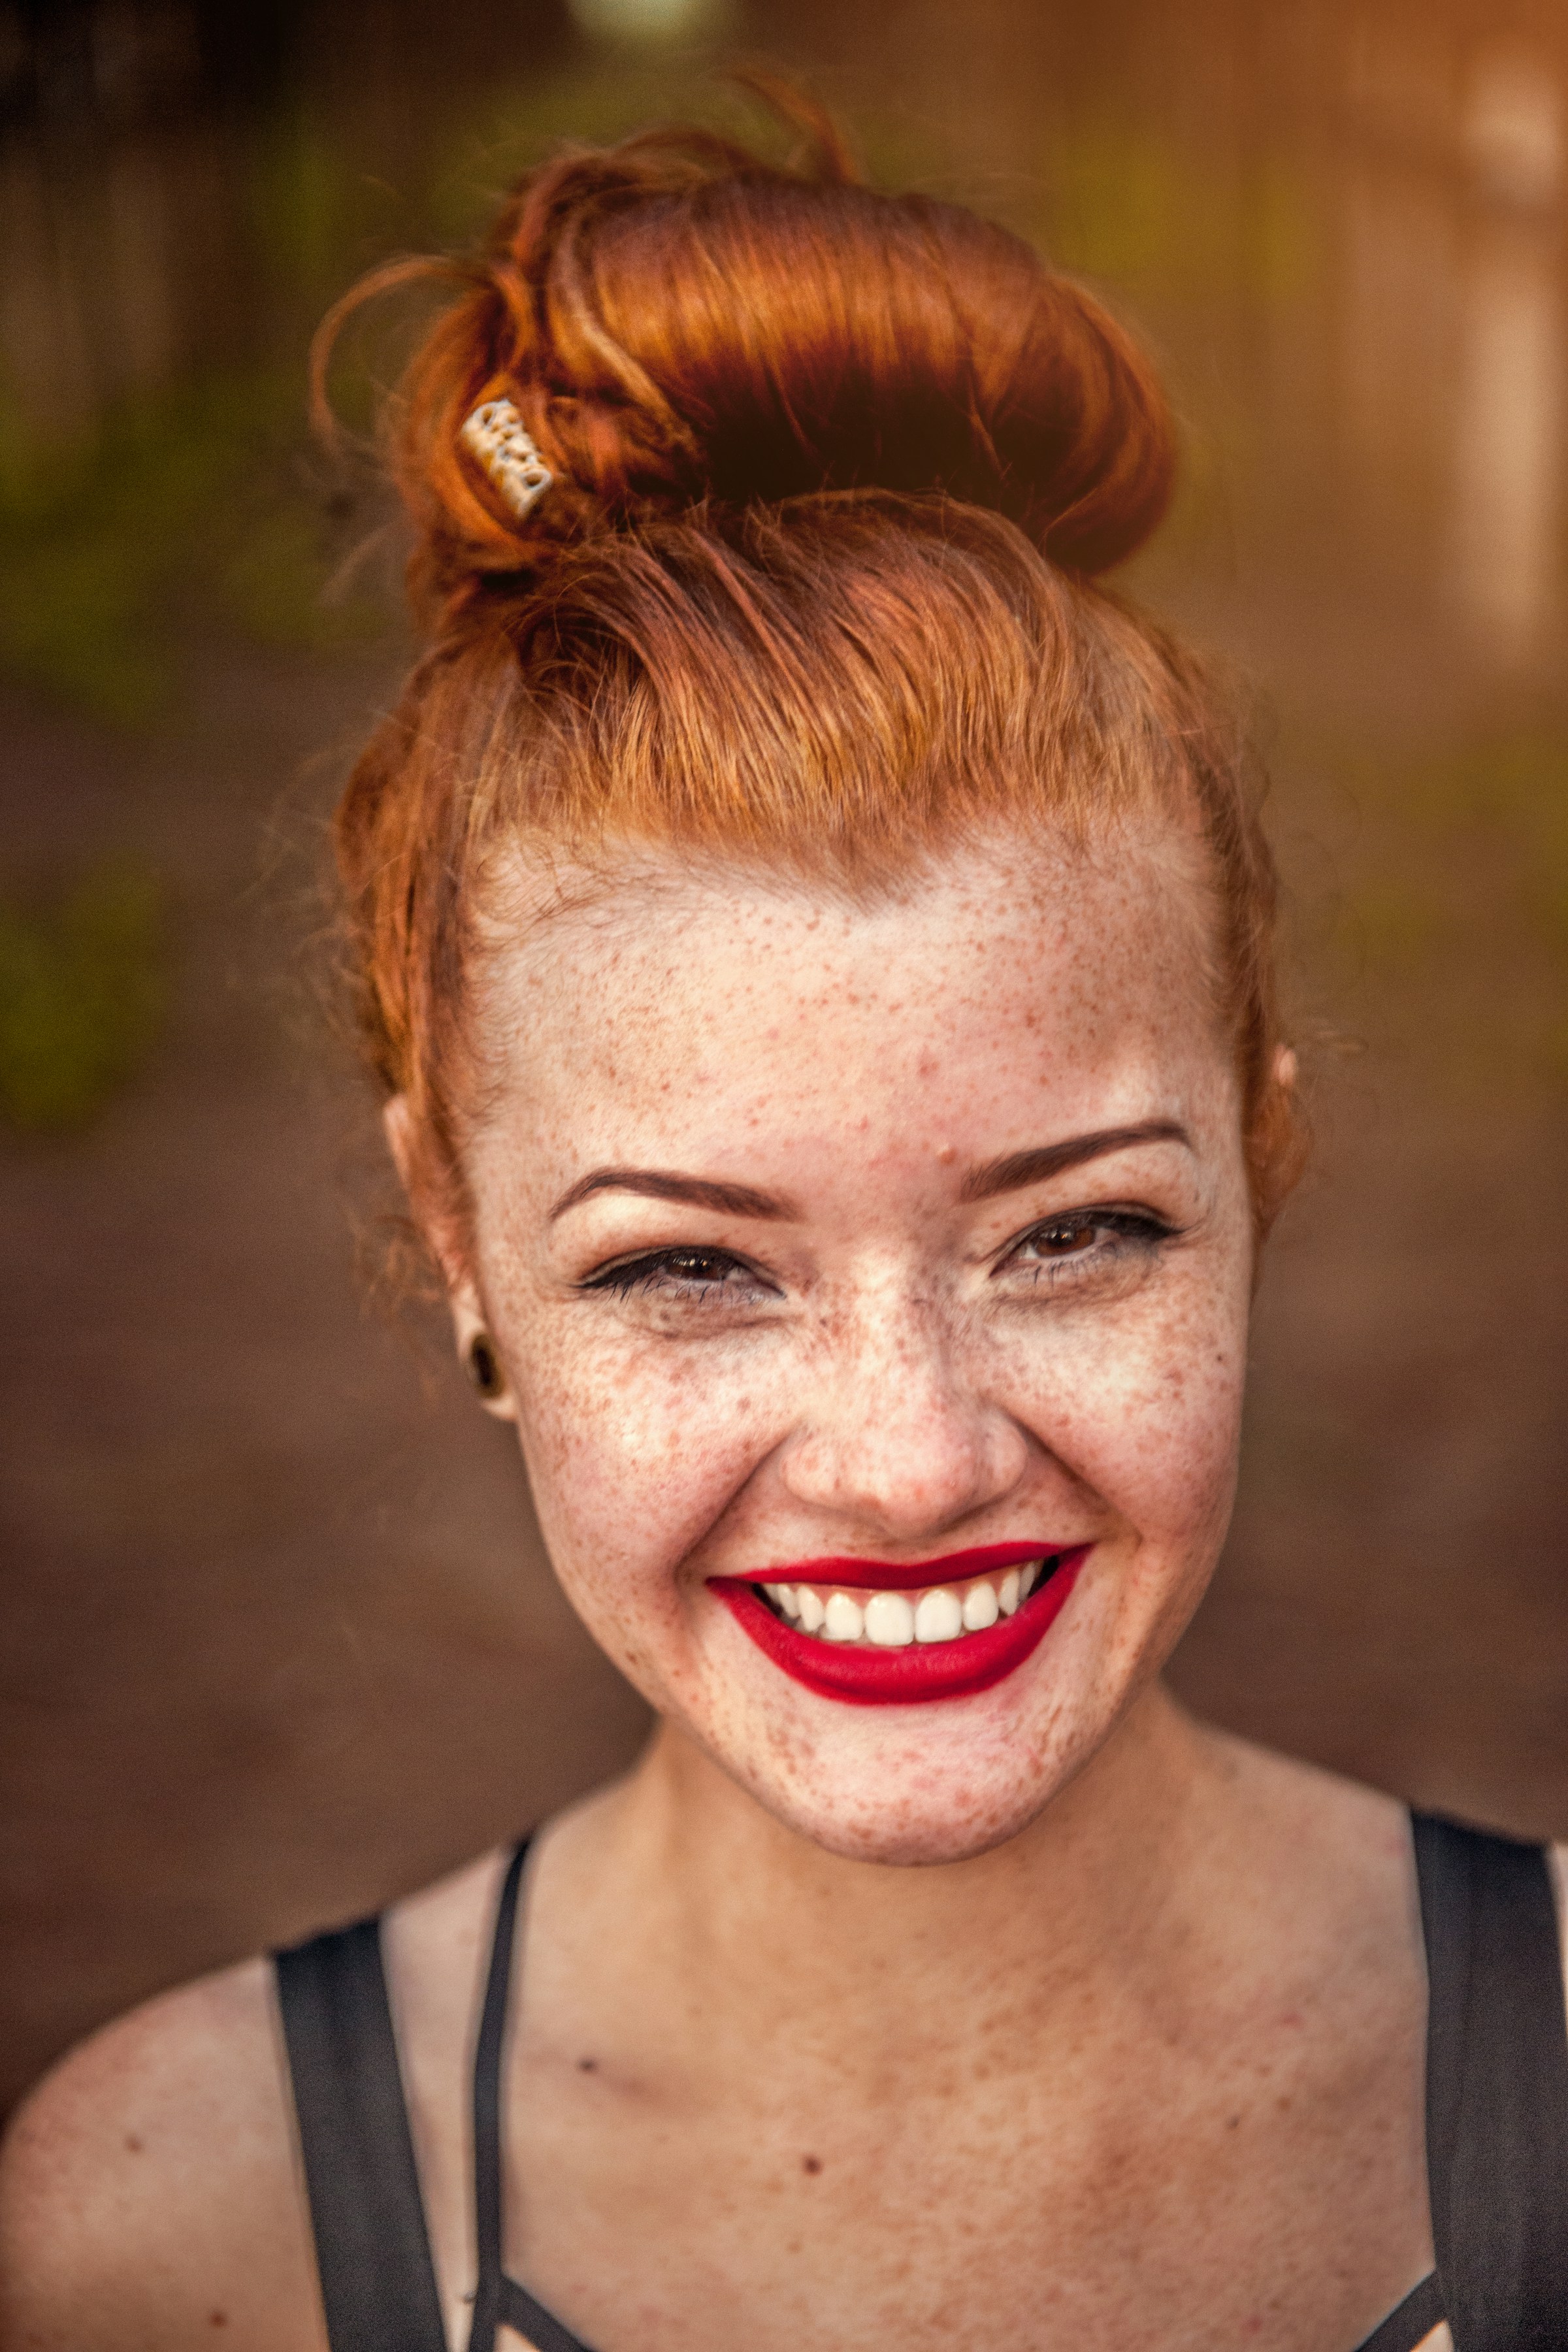 A woman with red hair and red lipstick | Source: Unsplash